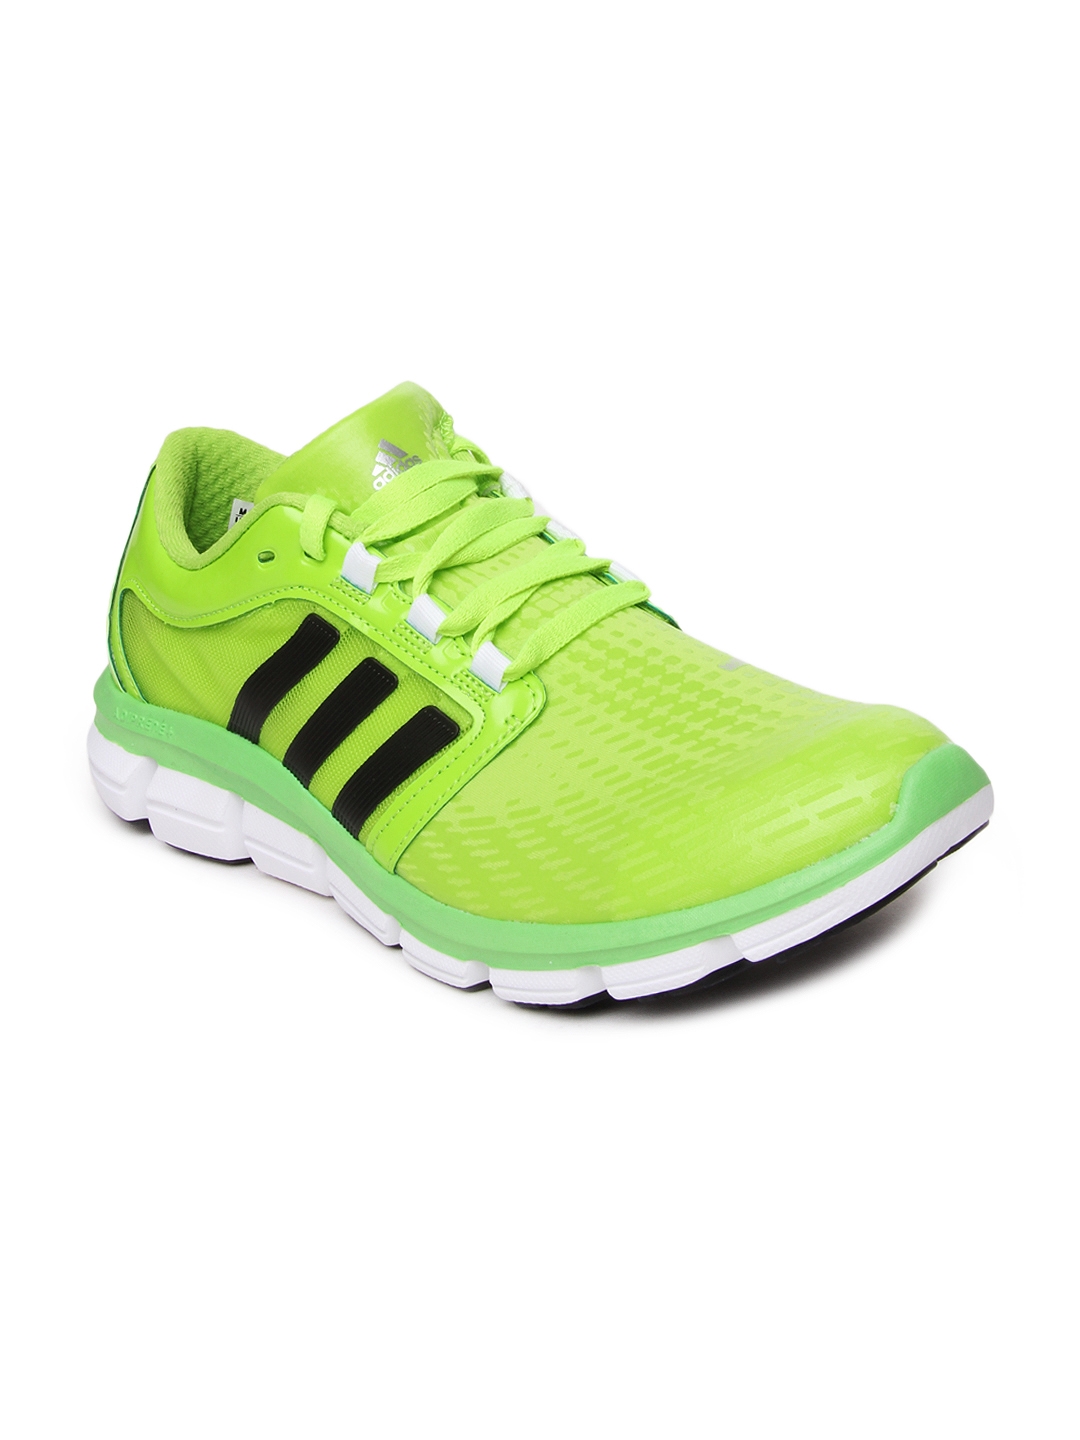 adidas Neon Collection: Shoes & Apparel